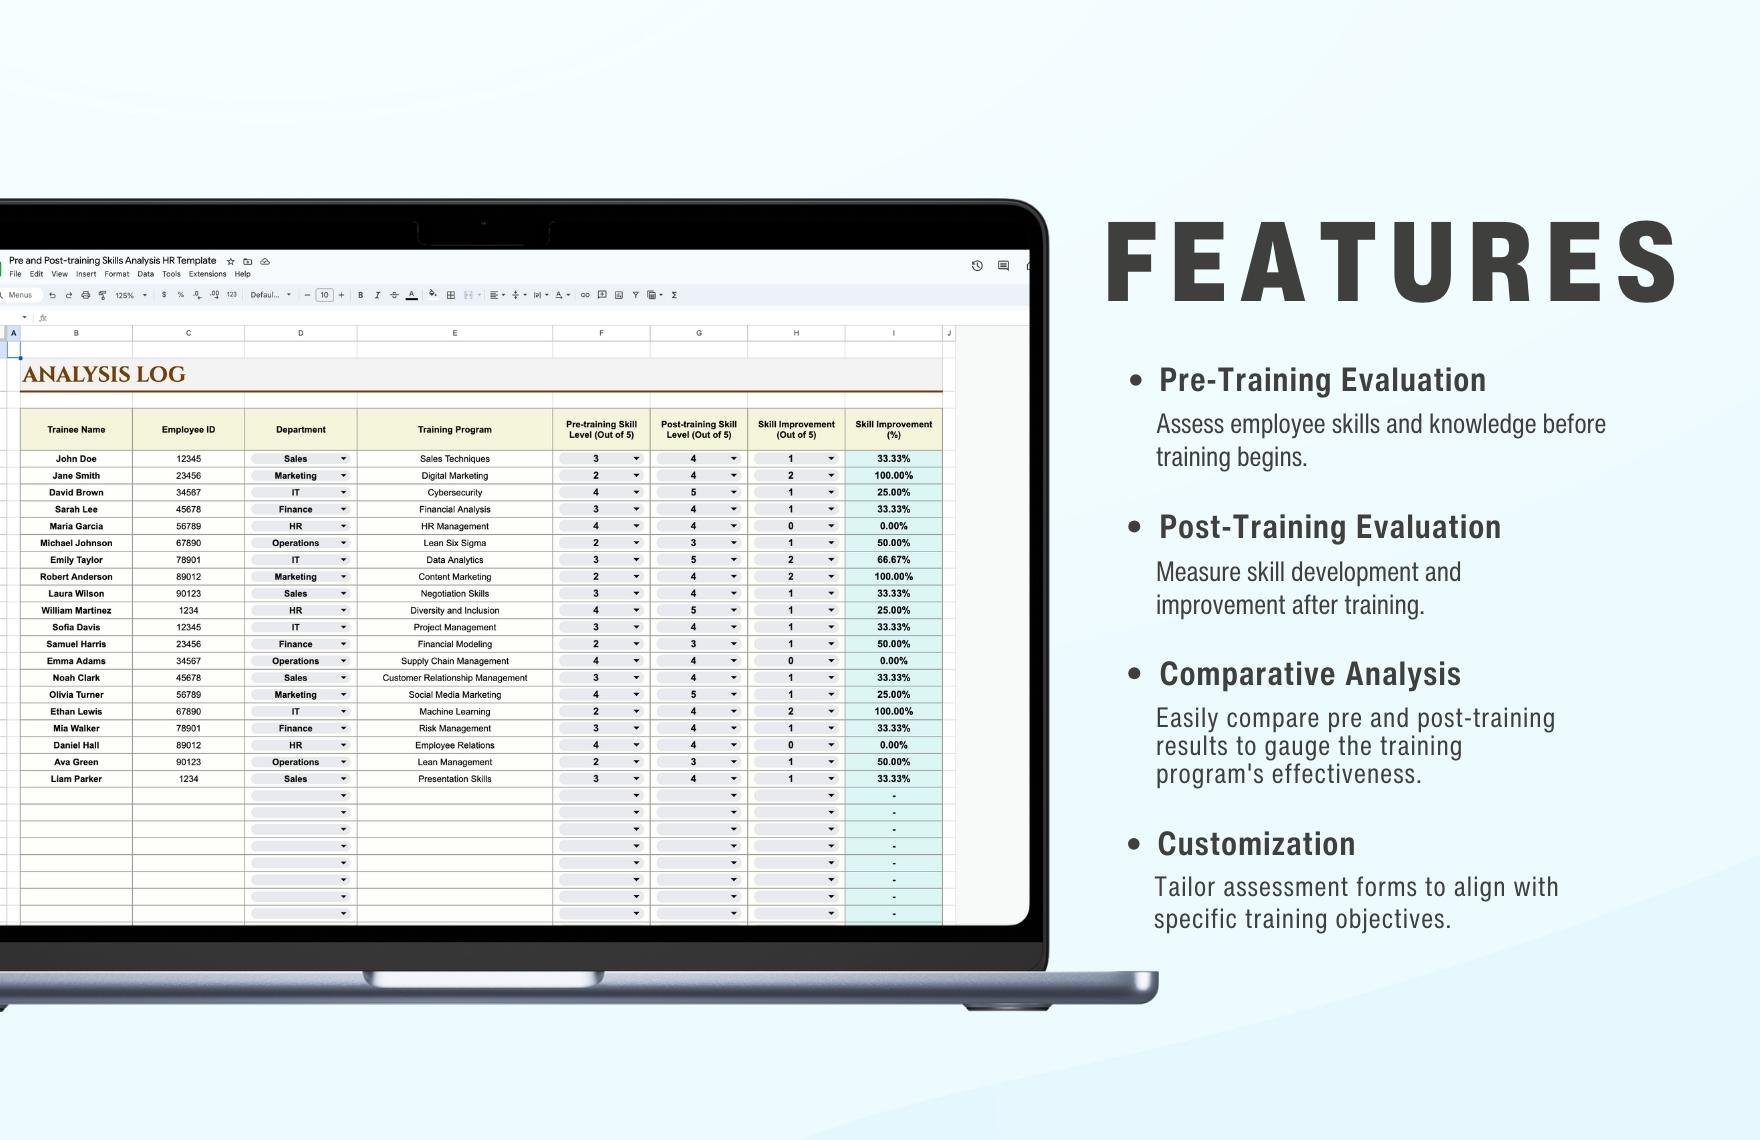 Pre and Post-training Skills Analysis HR Template